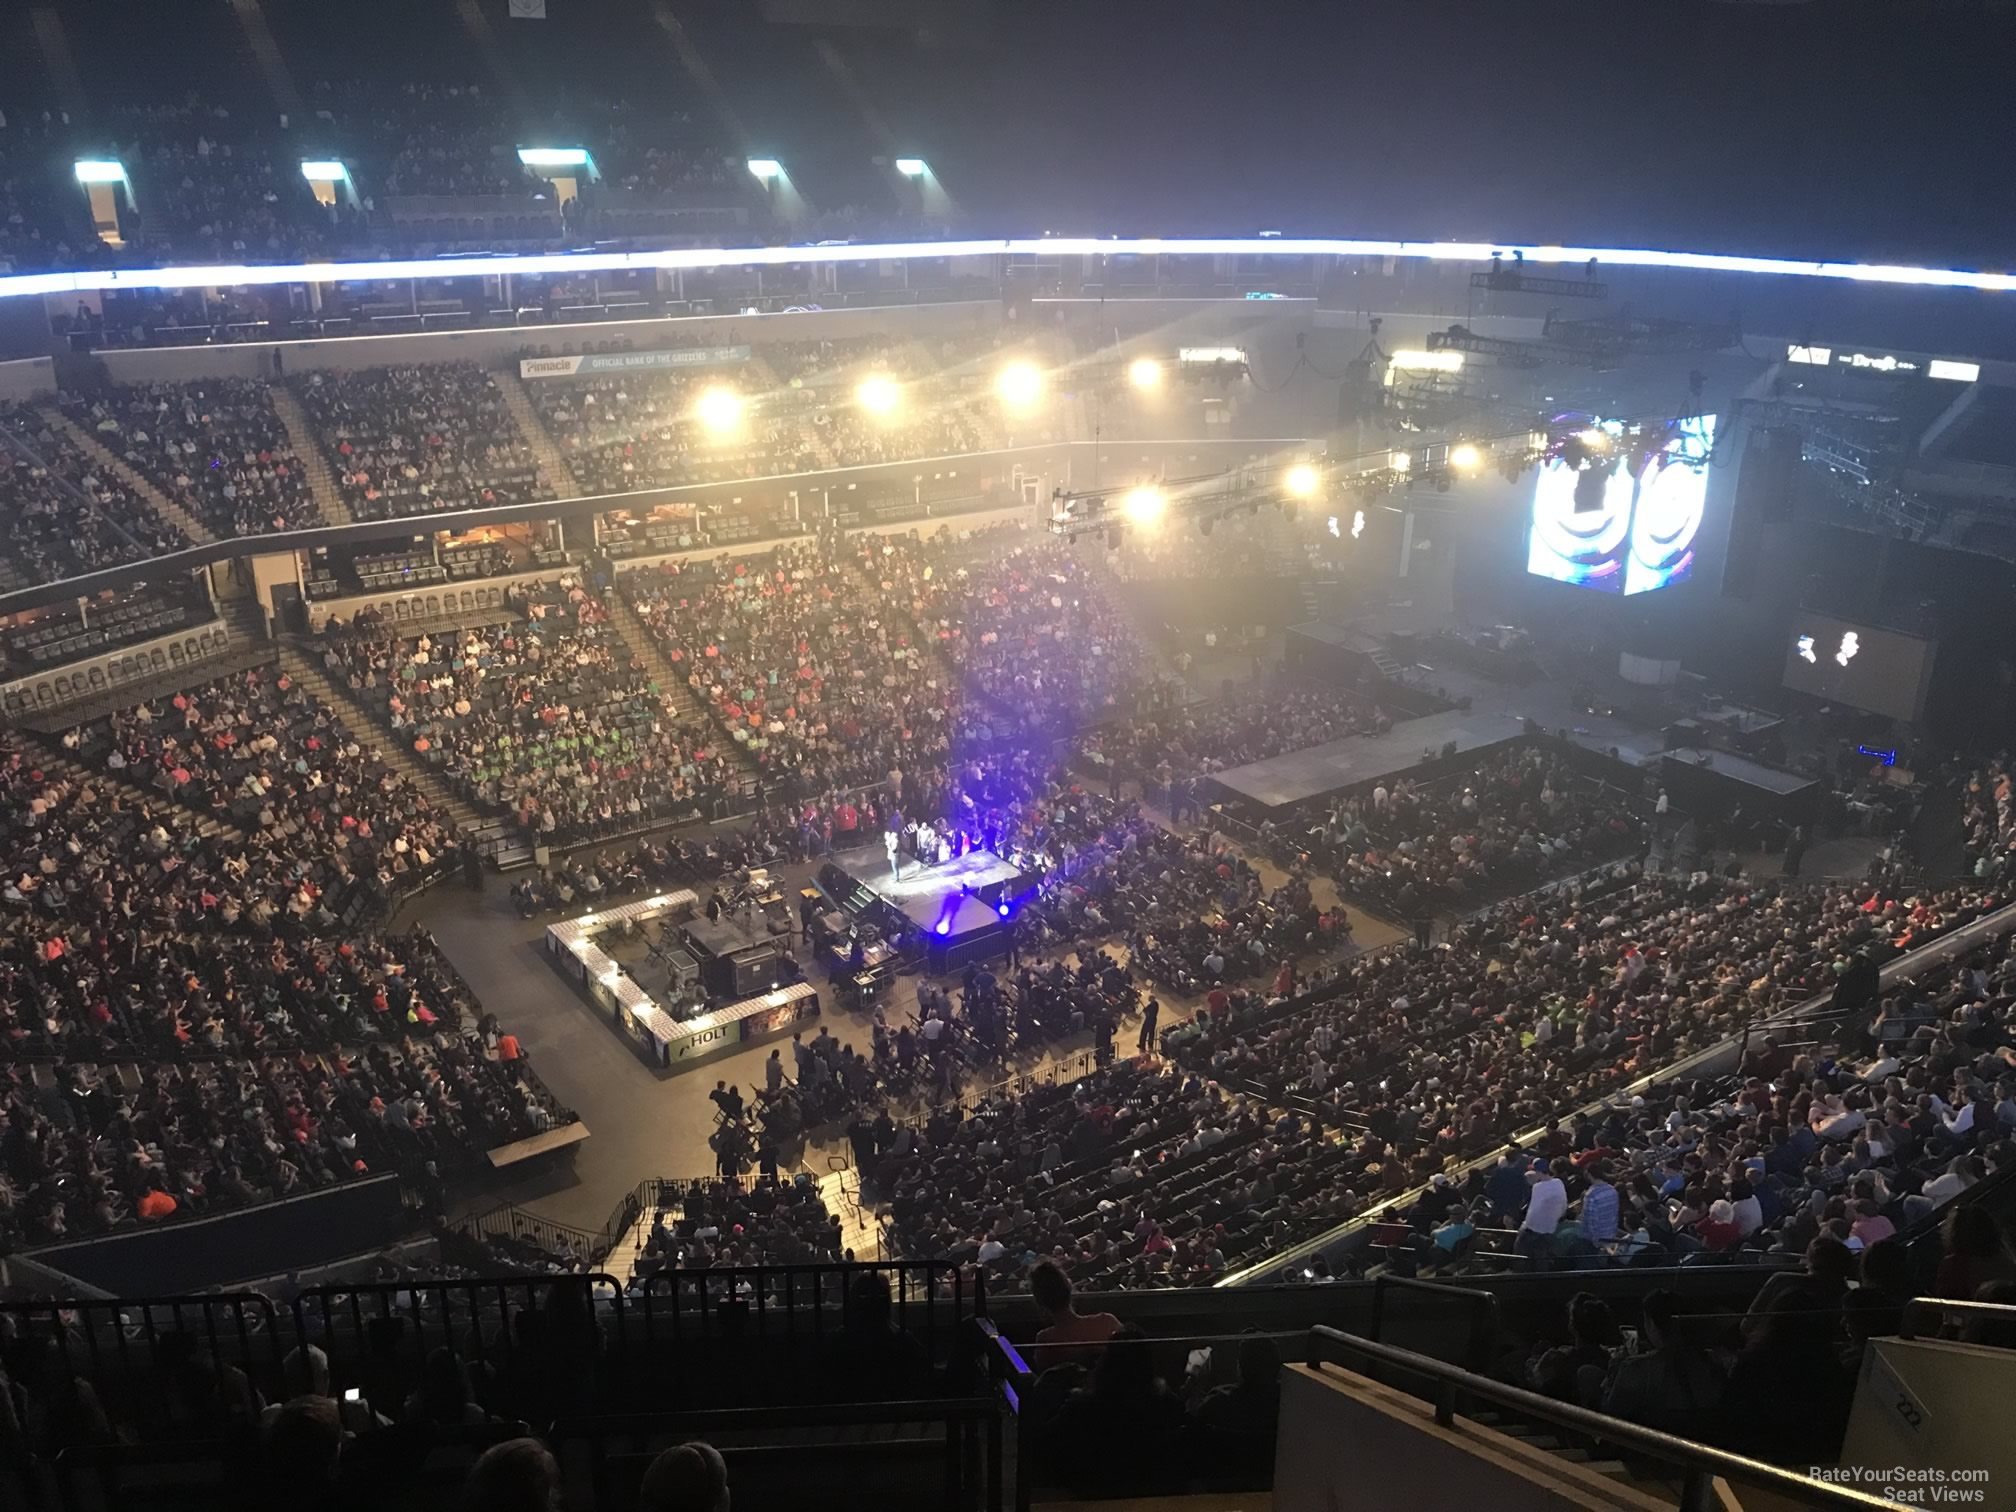 Section 221 at FedEx Forum for Concerts